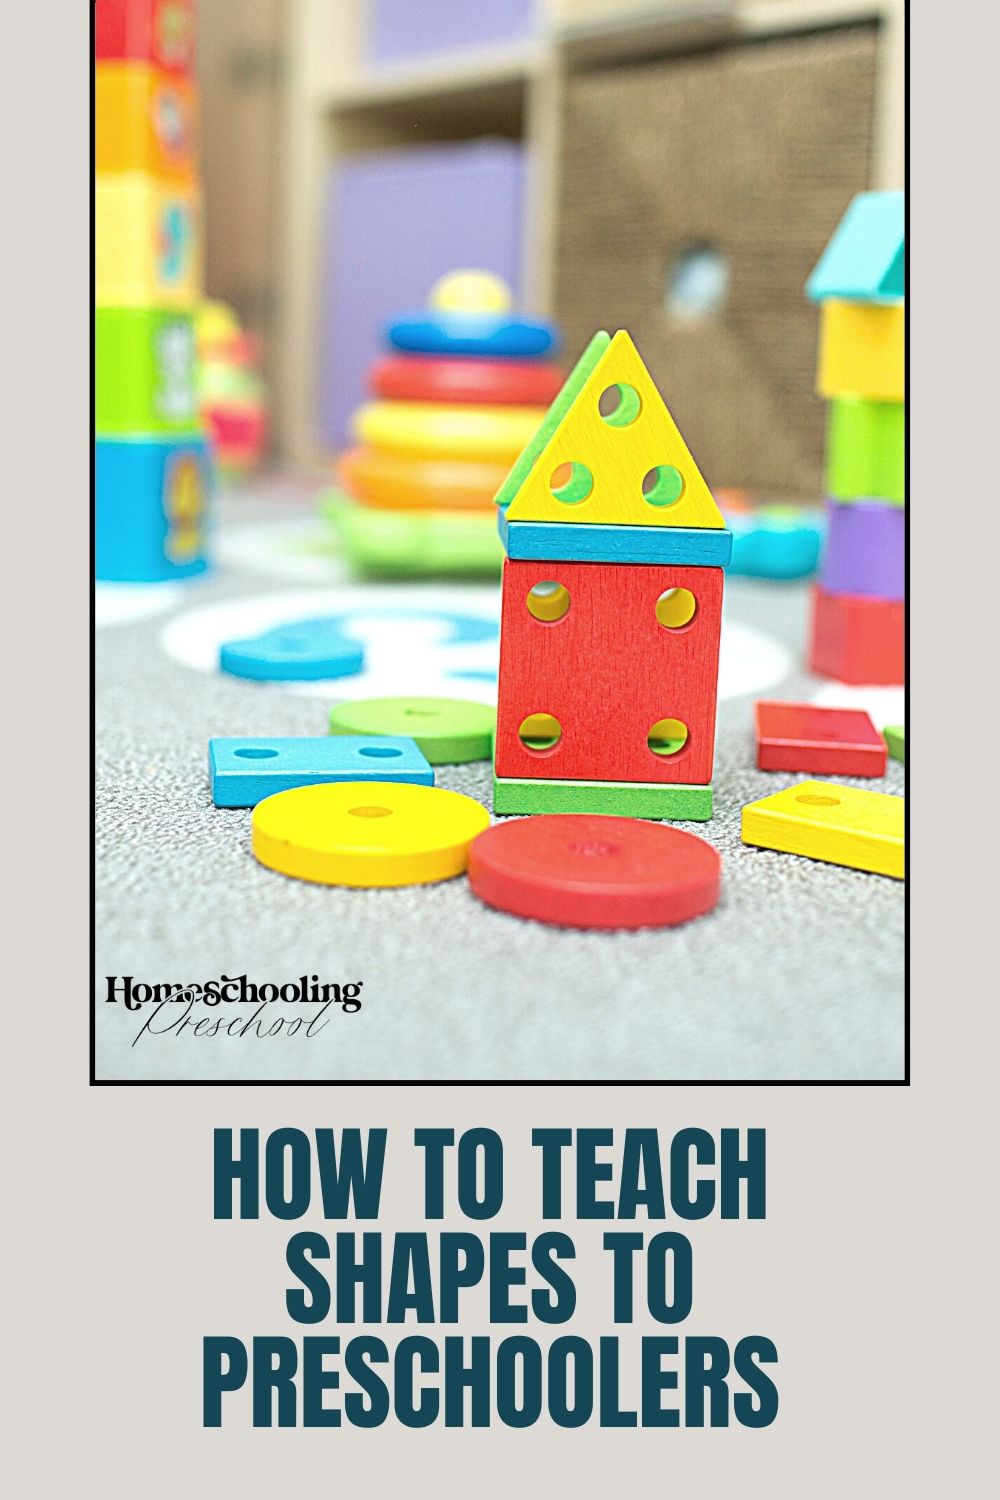 How to Teach Shapes to Preschoolers